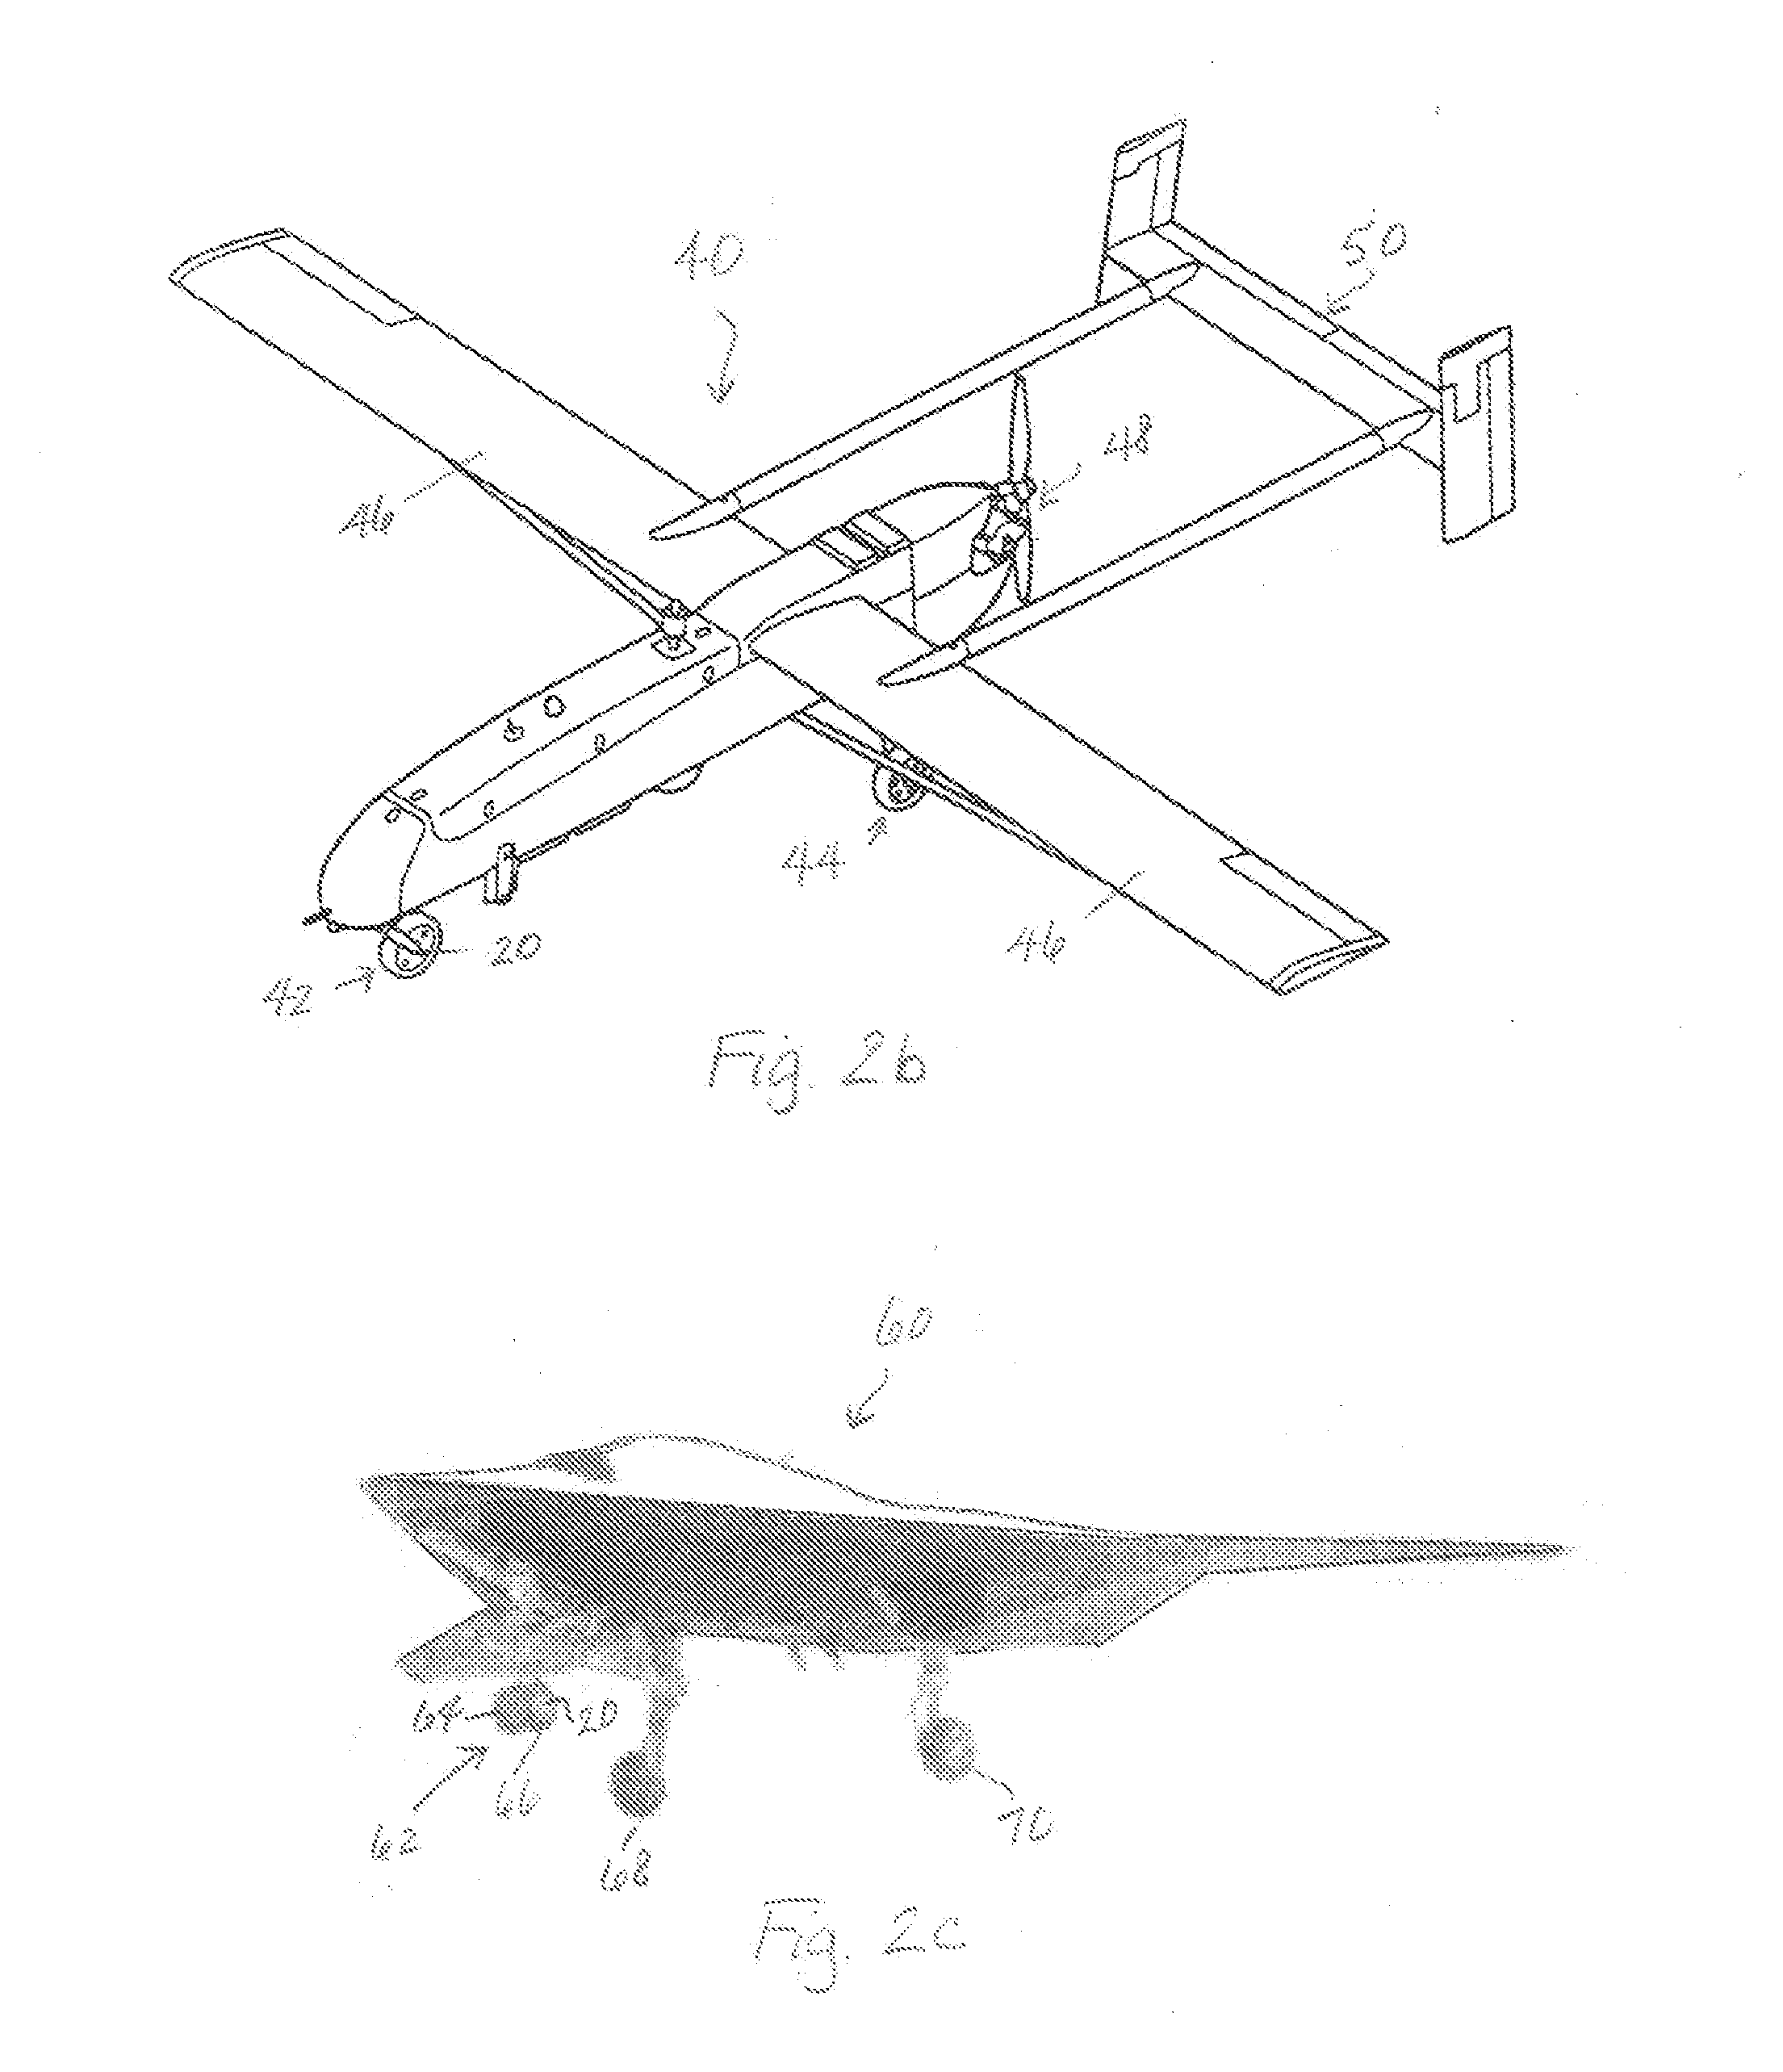 Method for improving ground travel capability and enhancing stealth in unmanned aerial vehicles